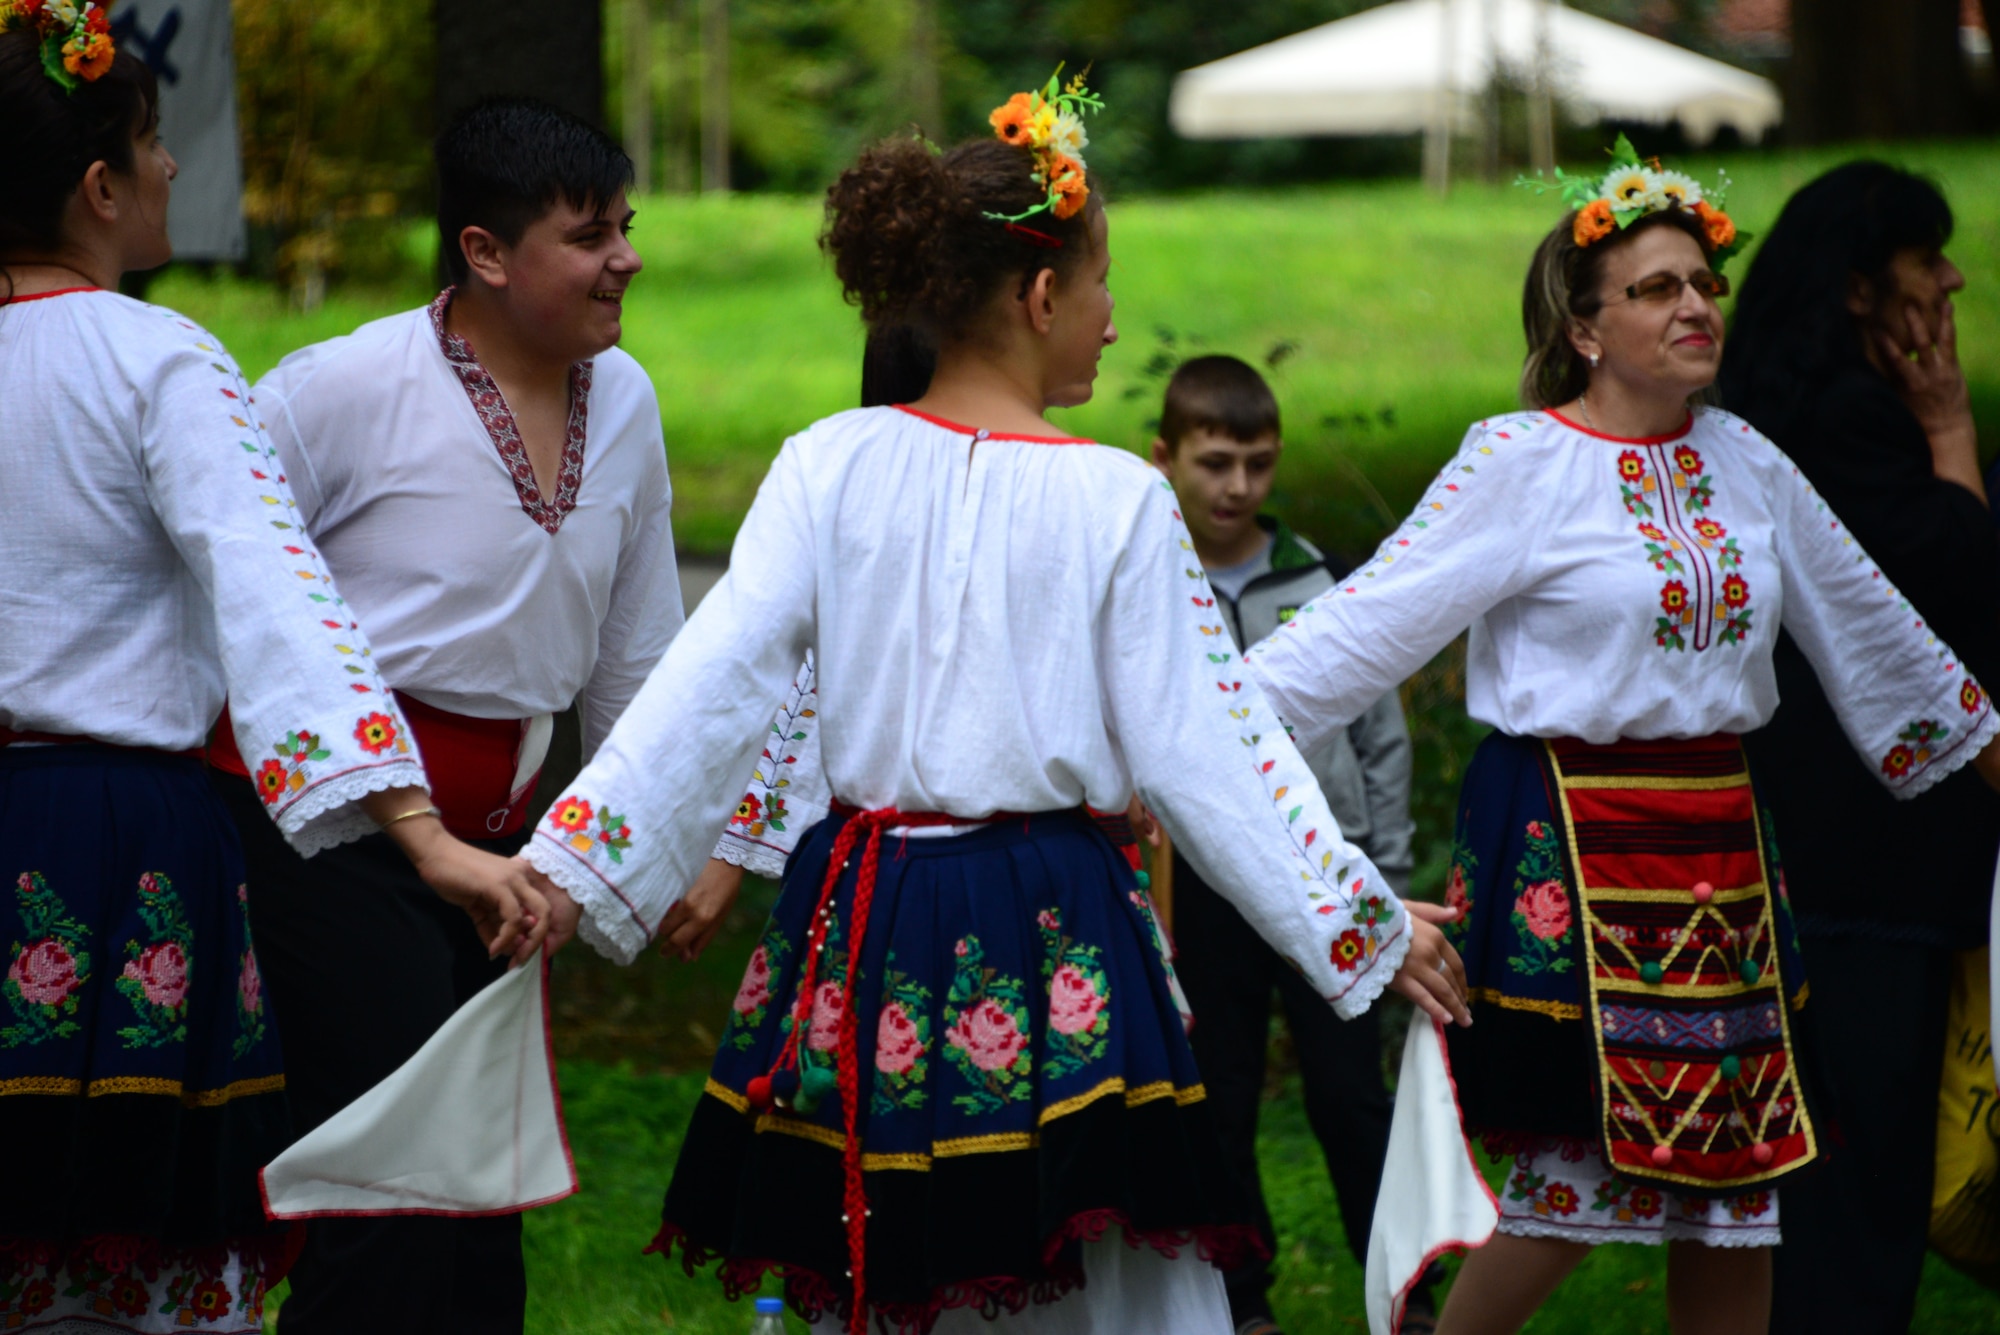 Locals dressed in traditional attire dance in a city park in Plovdiv, Bulgaria.  Tennessee National Guard Soldiers and Airmen enjoyed a Morale Wellness and Recreation visit to Plovdiv on Aug.13, 2016 while they were deployed to Novo Selo Training Area, Bulgaria to participate in Humanitarian Civic Assistance projects.    (U.S. Air National Guard photo by Master Sgt. Kendra M. Owenby, 134 ARW Public Affairs)